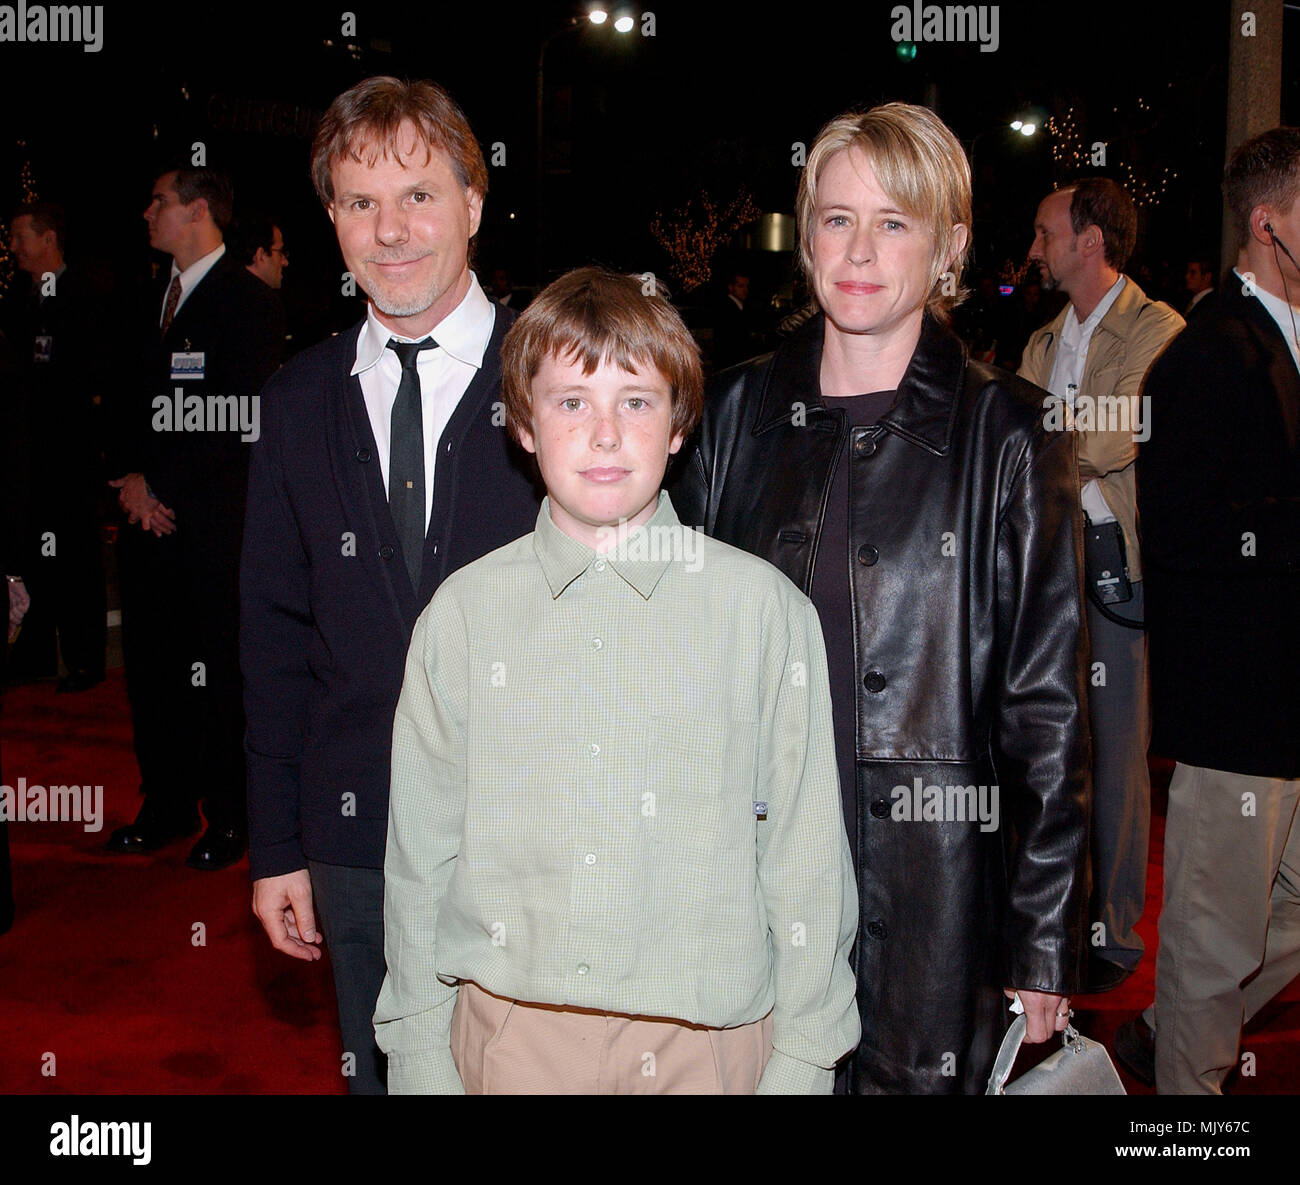 David Arada - screen writer - with wife and son  arriving at the premiere of Spy Game in Westwood Los Angeles. November19, 2001.           -            AradaDavid Cathy writer01.JPG           -              AradaDavid Cathy writer01.JPGAradaDavid Cathy writer01  Event in Hollywood Life - California,  Red Carpet Event, Vertical, USA, Film Industry, Celebrities,  Photography, Bestof, Arts Culture and Entertainment, Topix Celebrities fashion /  from the Red Carpet-, Vertical, Best of, Hollywood Life, Event in Hollywood Life - California,  Red Carpet , USA, Film Industry, Celebrities,  movie celeb Stock Photo